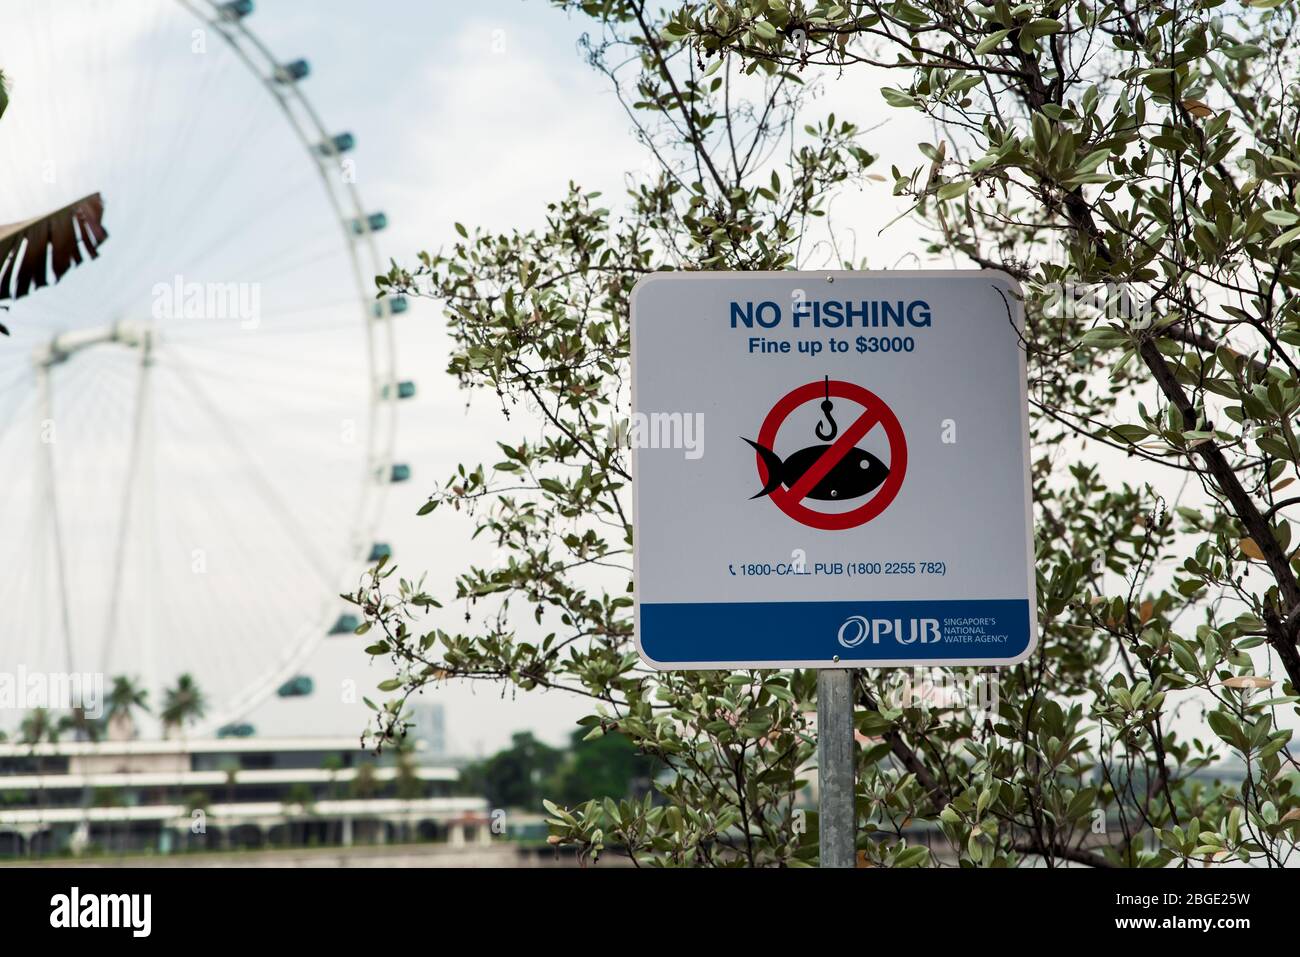 Singapore, Oct 2019: No fishing warning sign in public park. Fishing not  allowed in this area with fine up to $3000 Stock Photo - Alamy